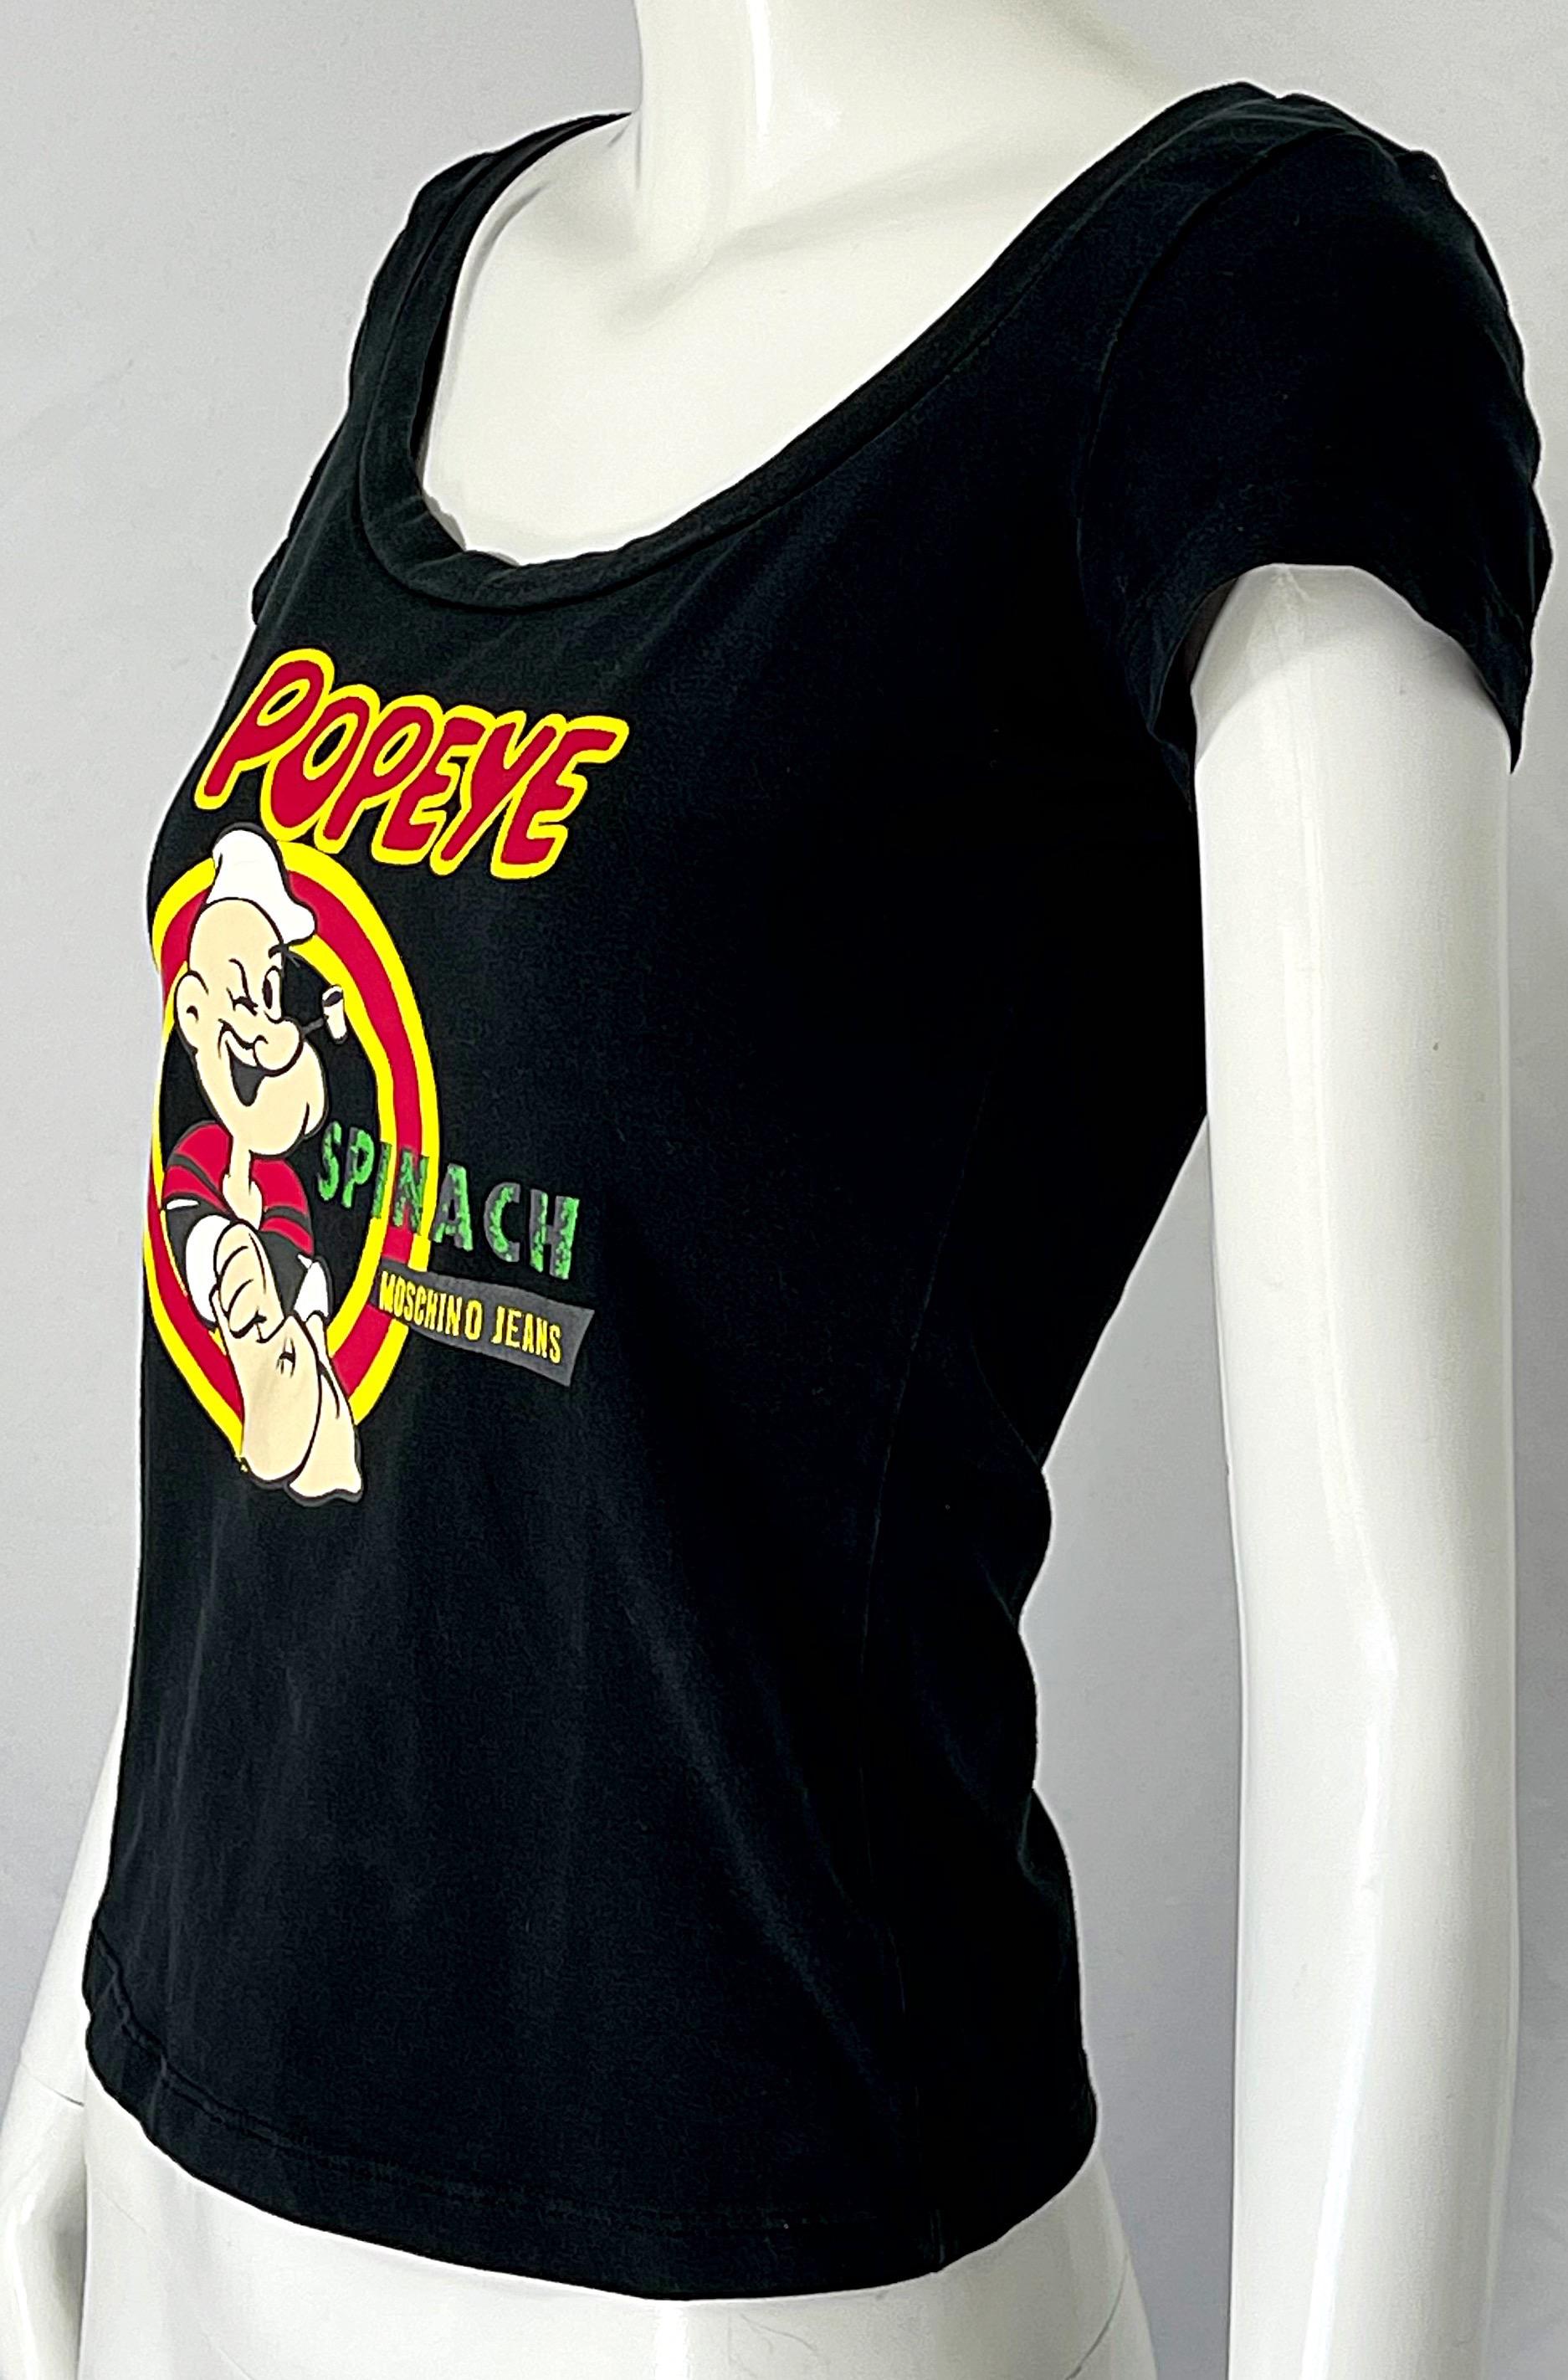 Black Moschino Jeans Popeye the Sailor Man Novelty Print Vintage 90s Tee Shirt Spinach